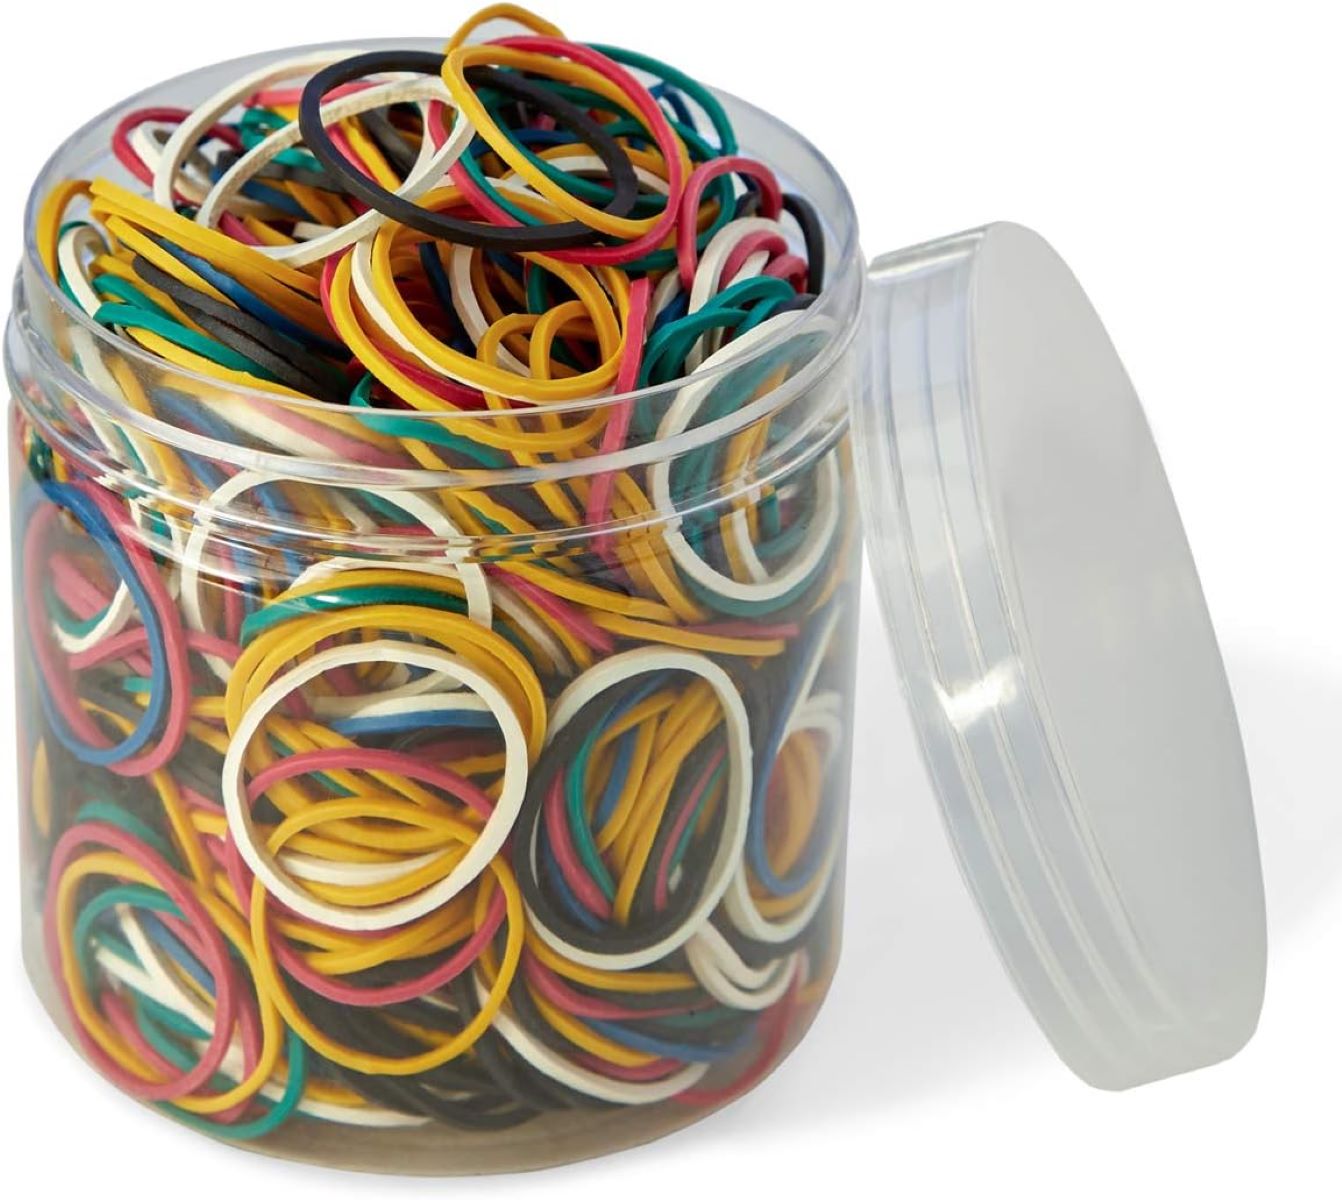 How To Store Rubber Bands